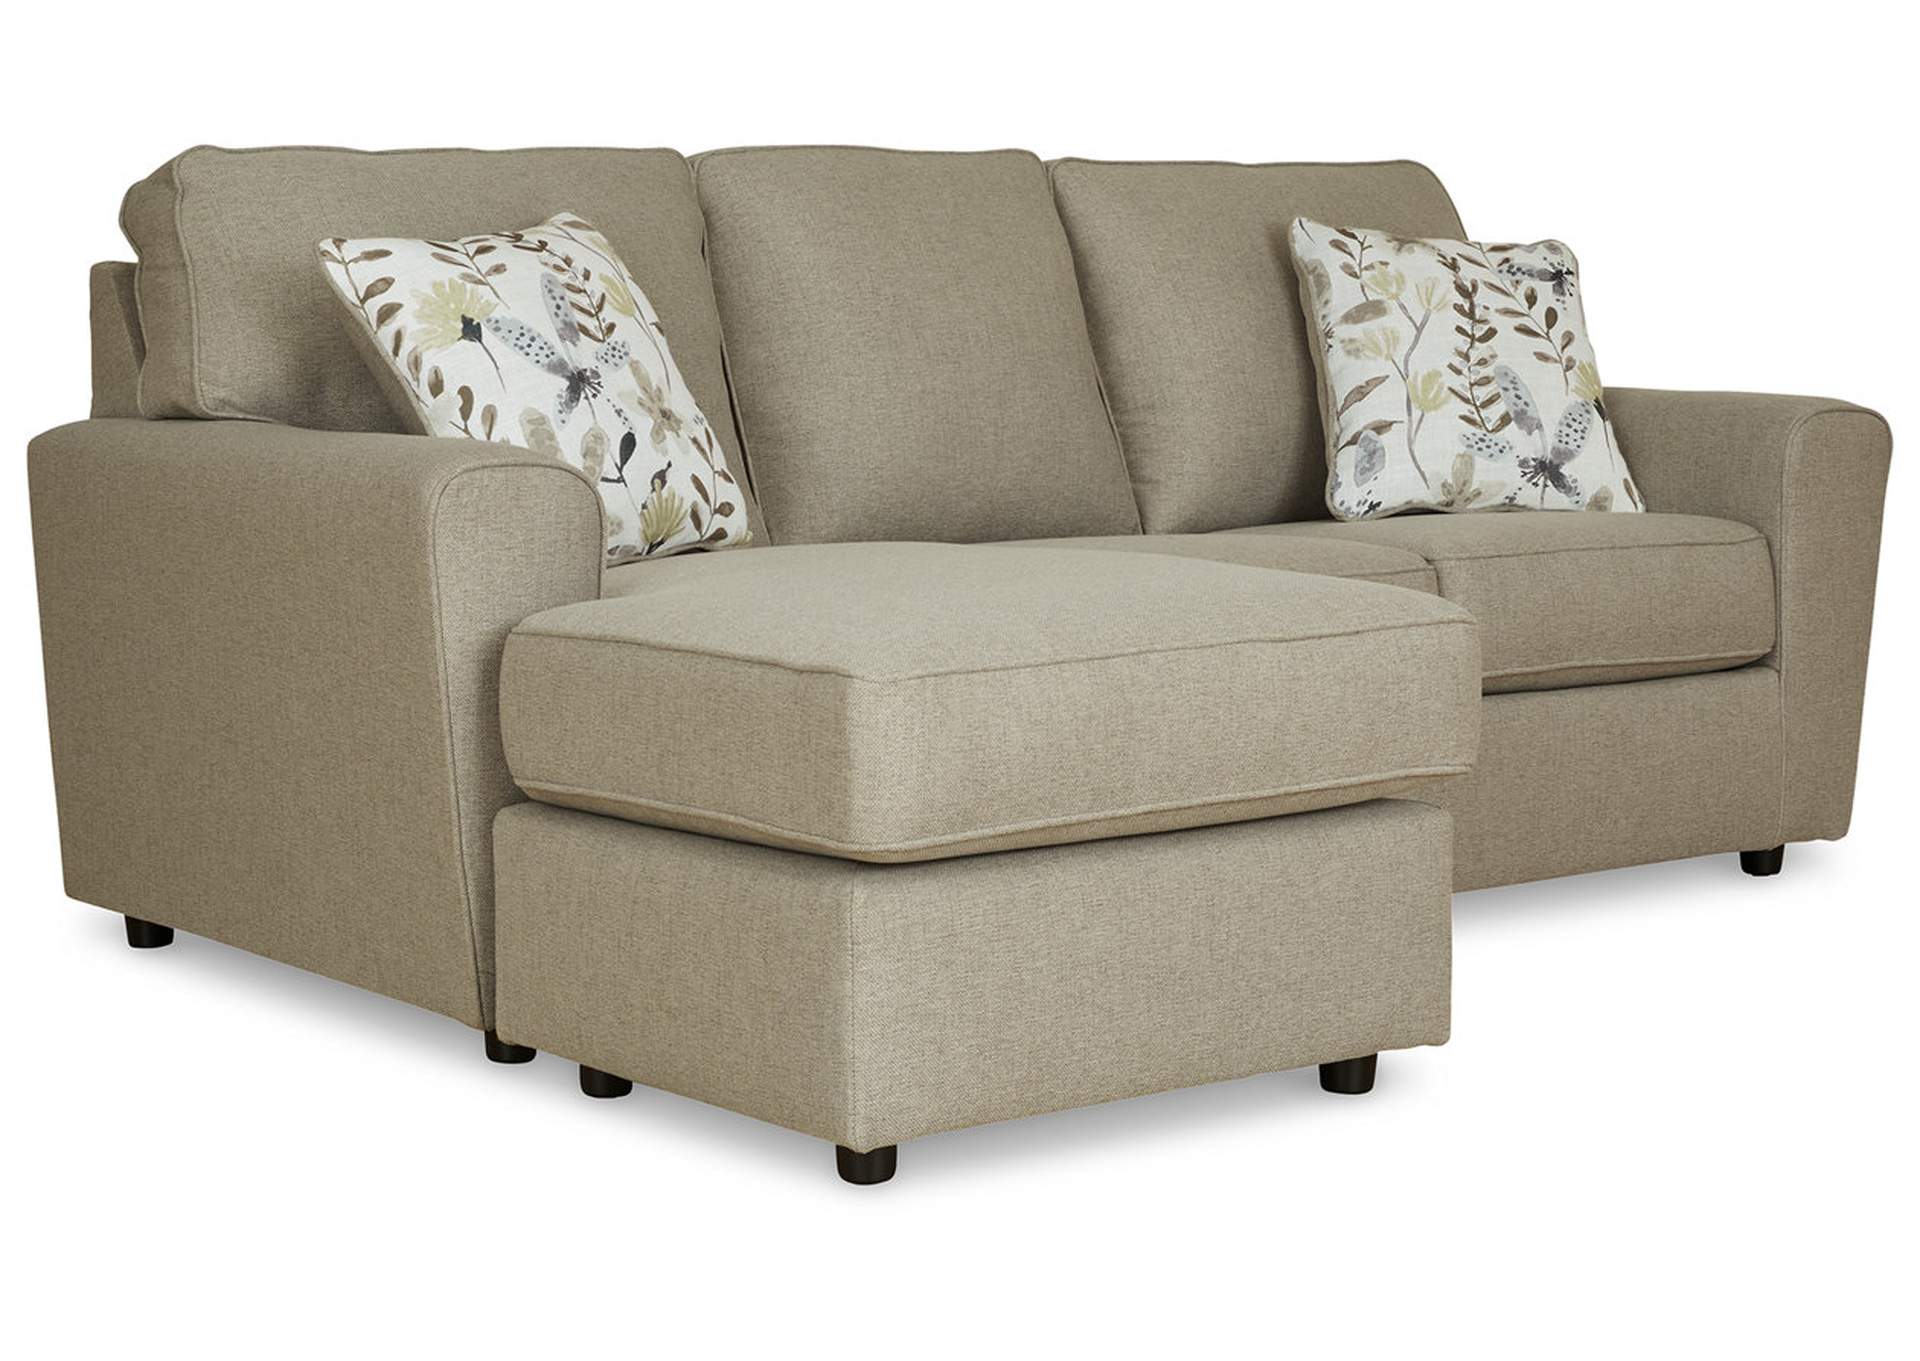 Renshaw Sofa Chaise,Signature Design By Ashley